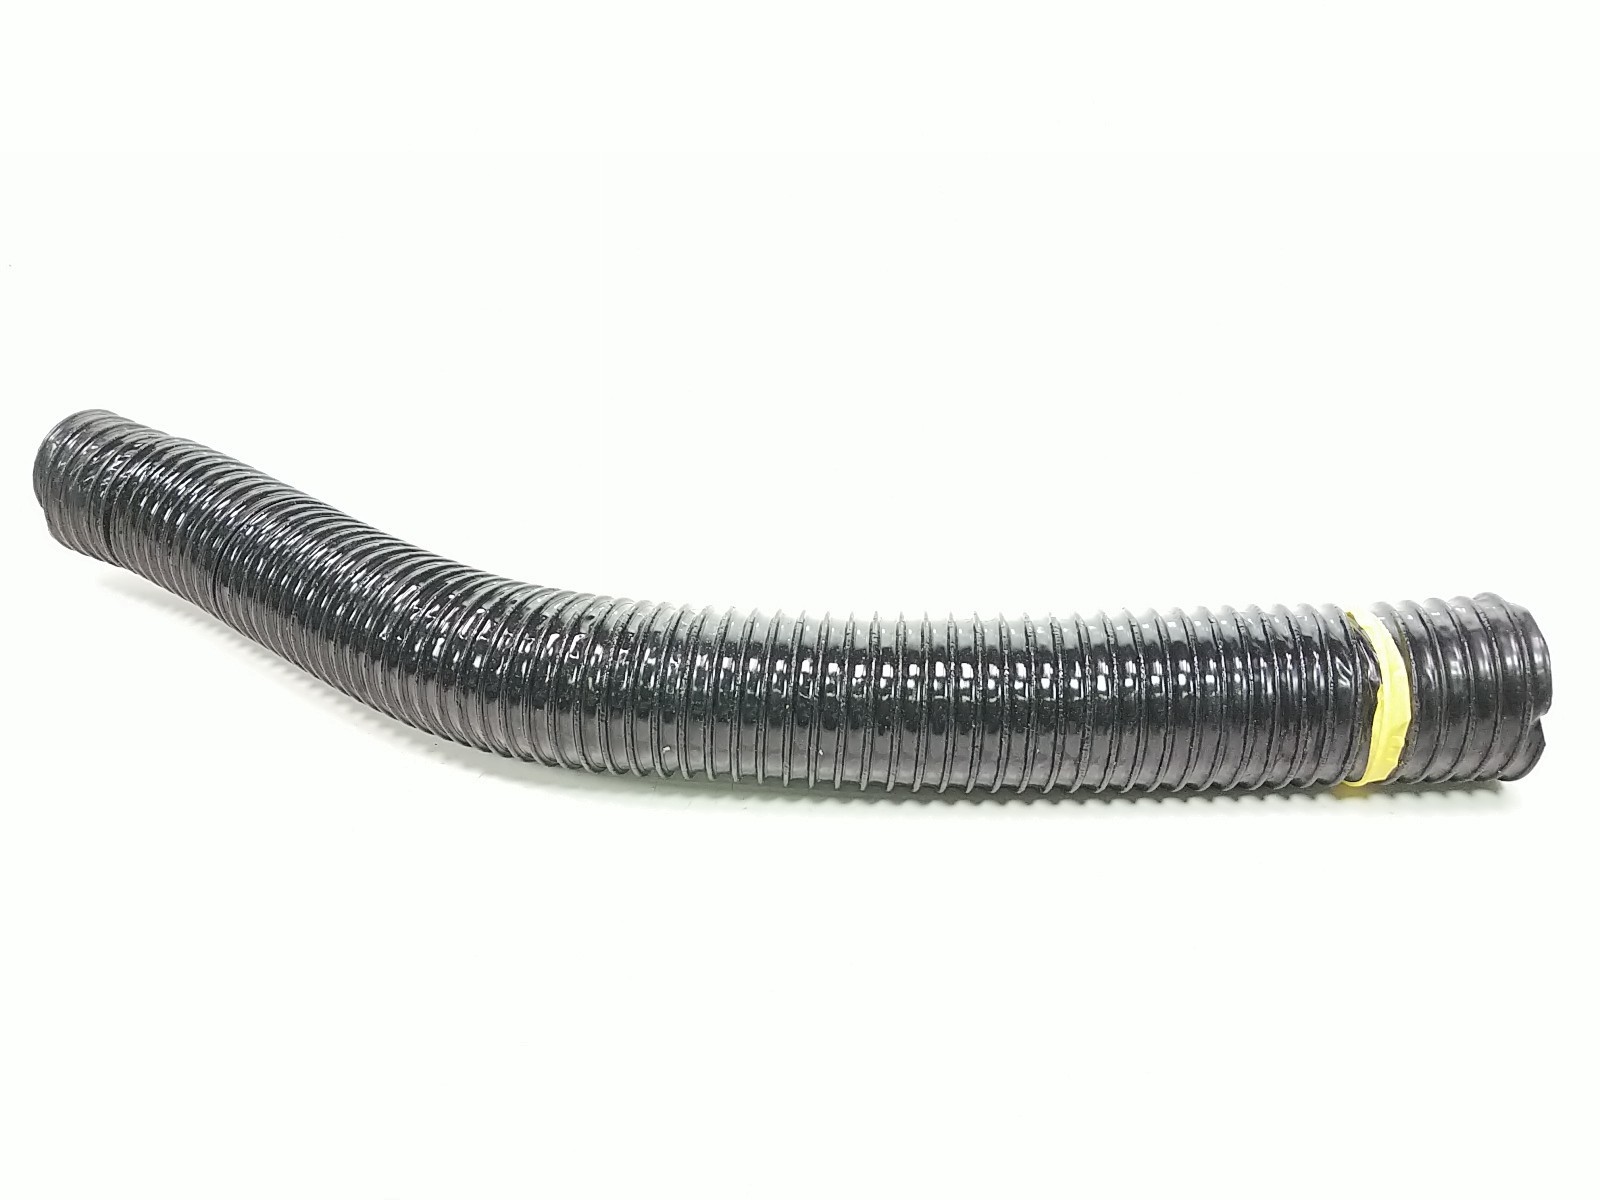 20 Yamaha Wave Runner EX Vent Air Intake Hose Duct Tube (A)